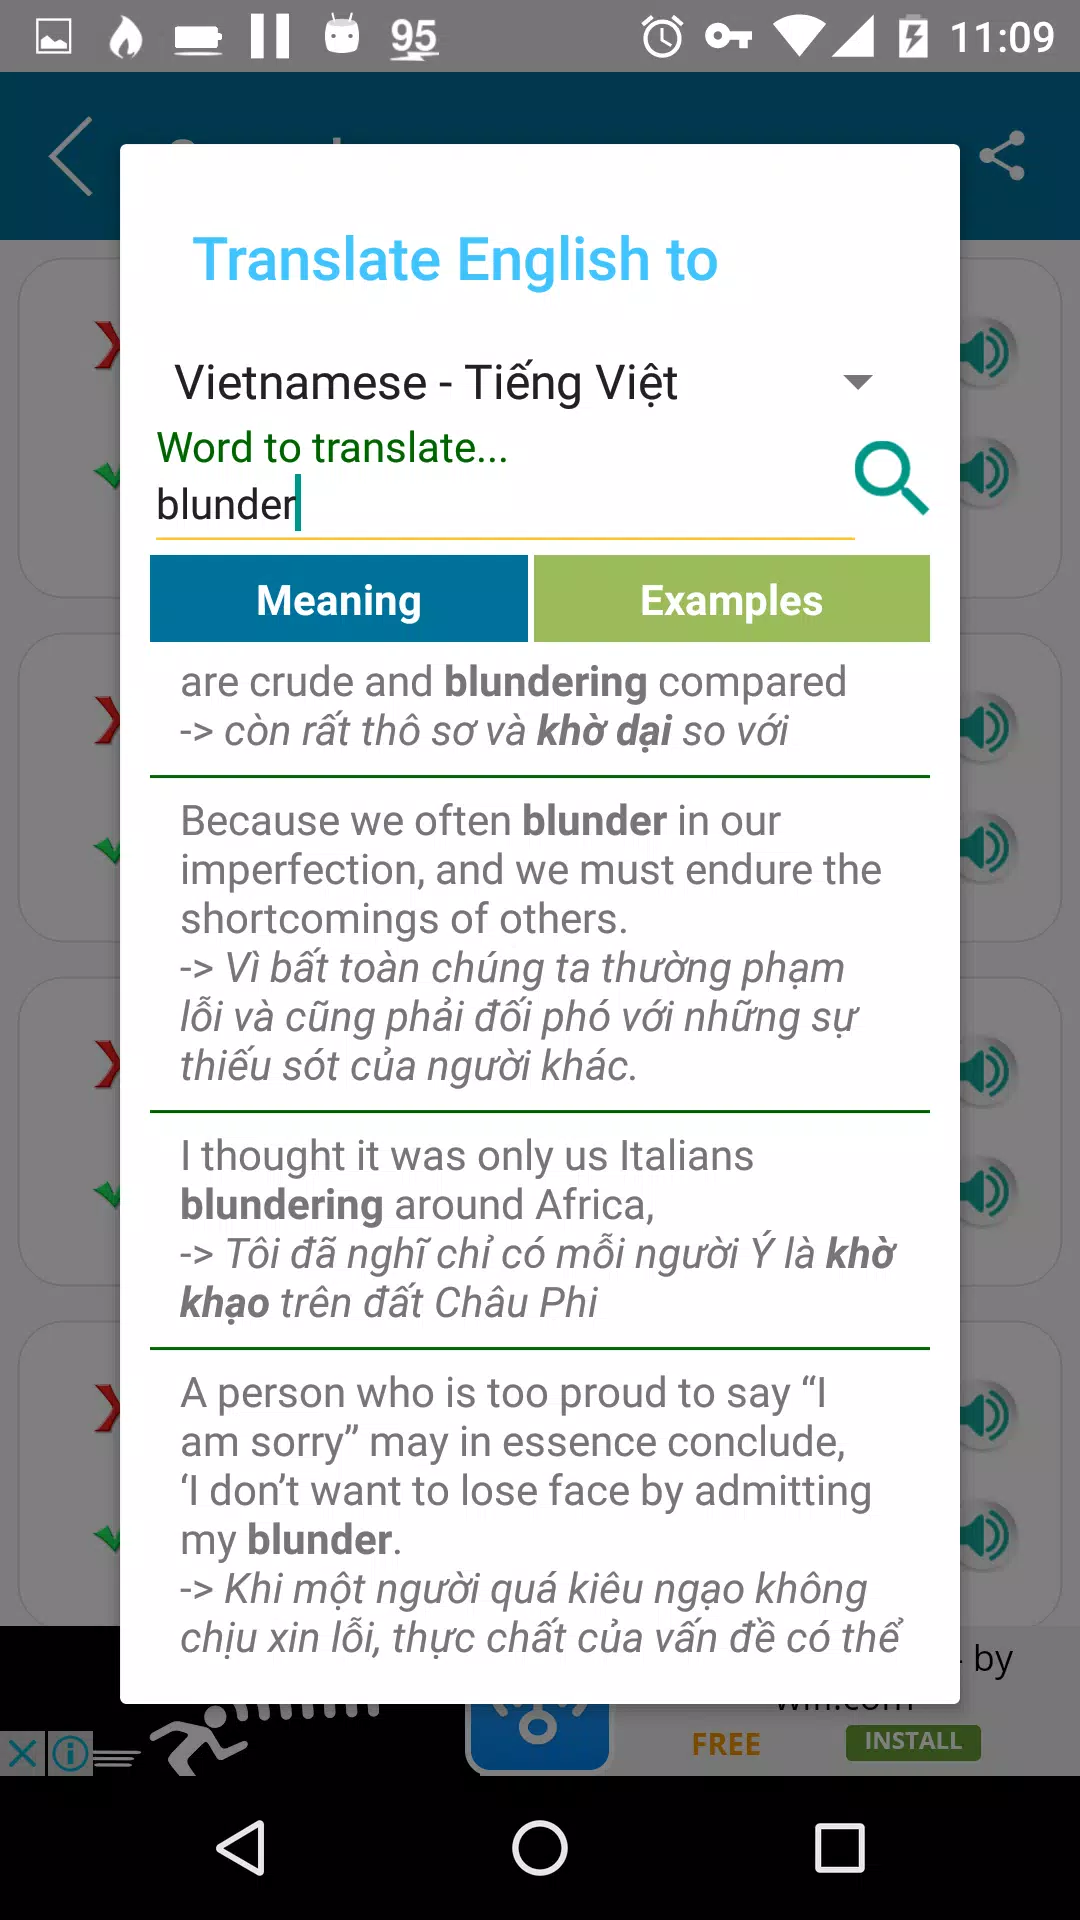 Blundering Meaning In English 